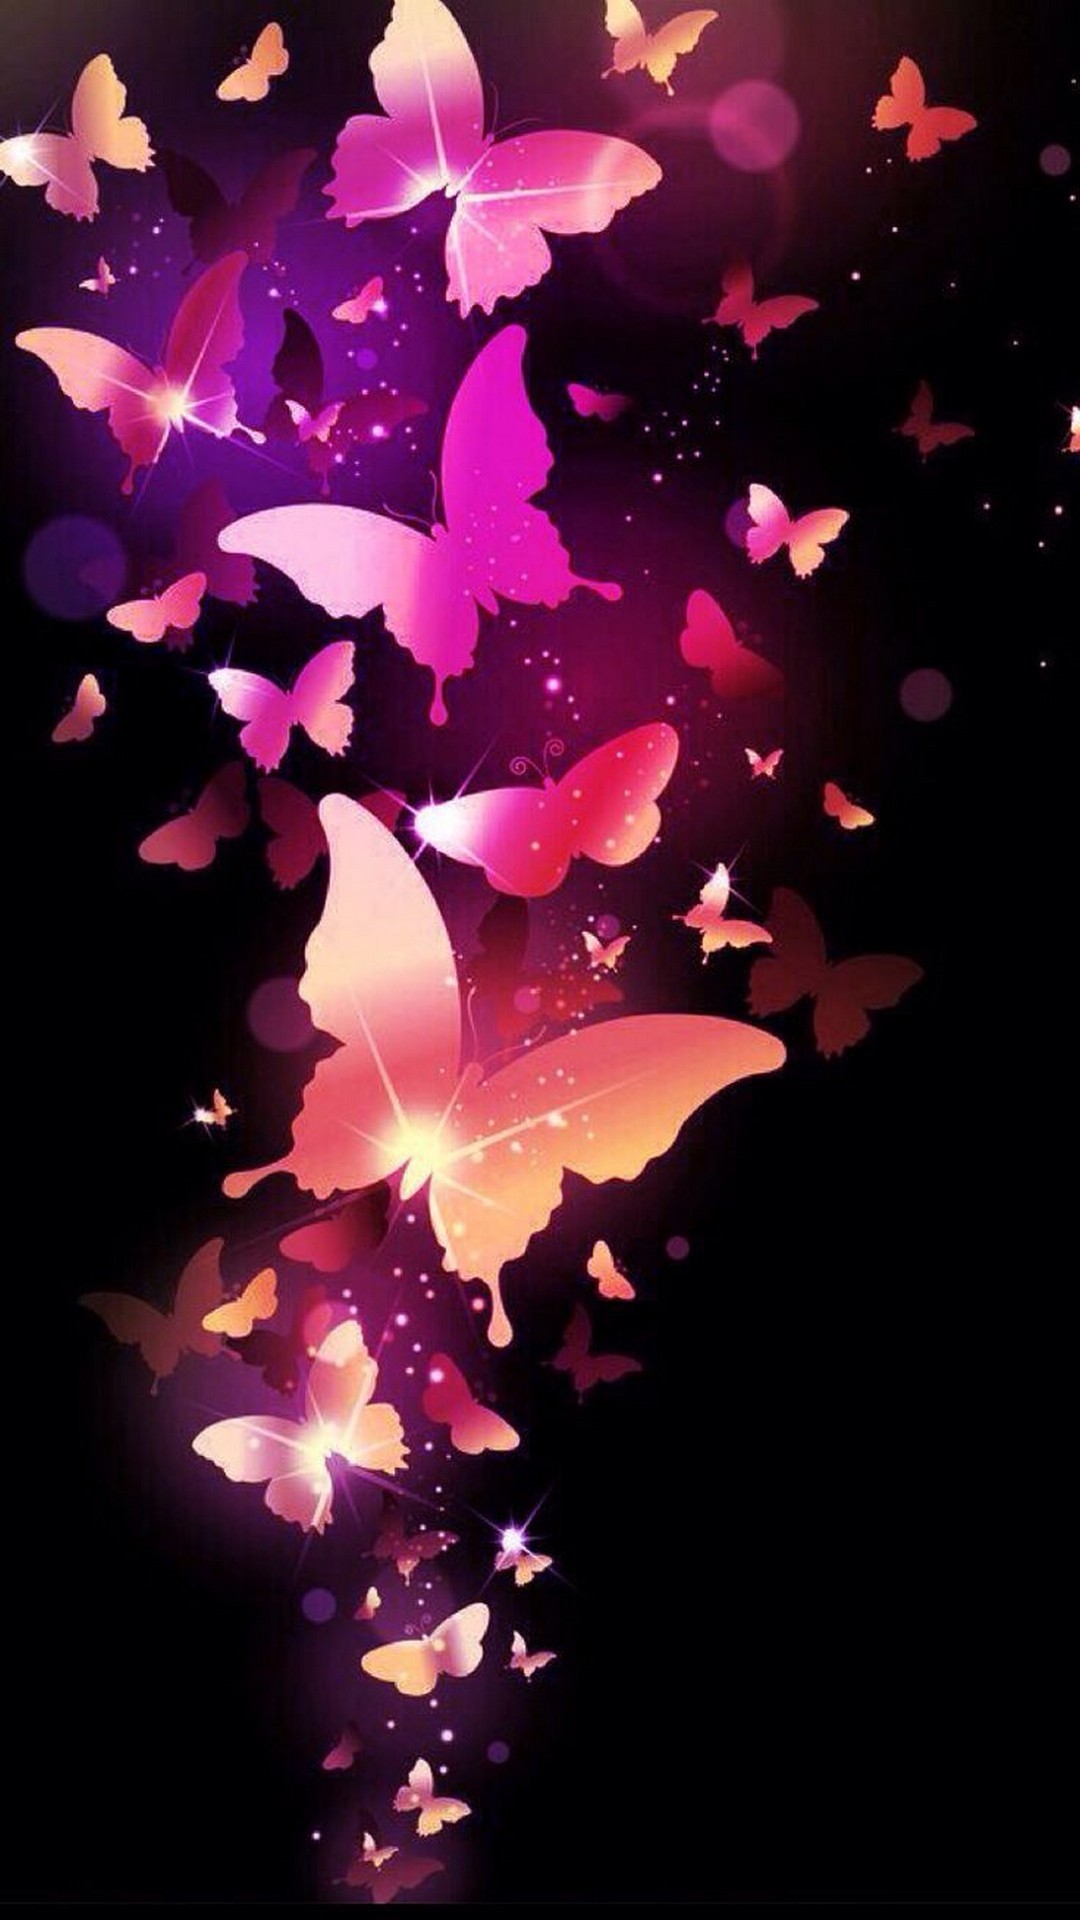 Wallpapers Phone Pink Butterfly With Hd Resolution - Wall Papers For Phone - HD Wallpaper 